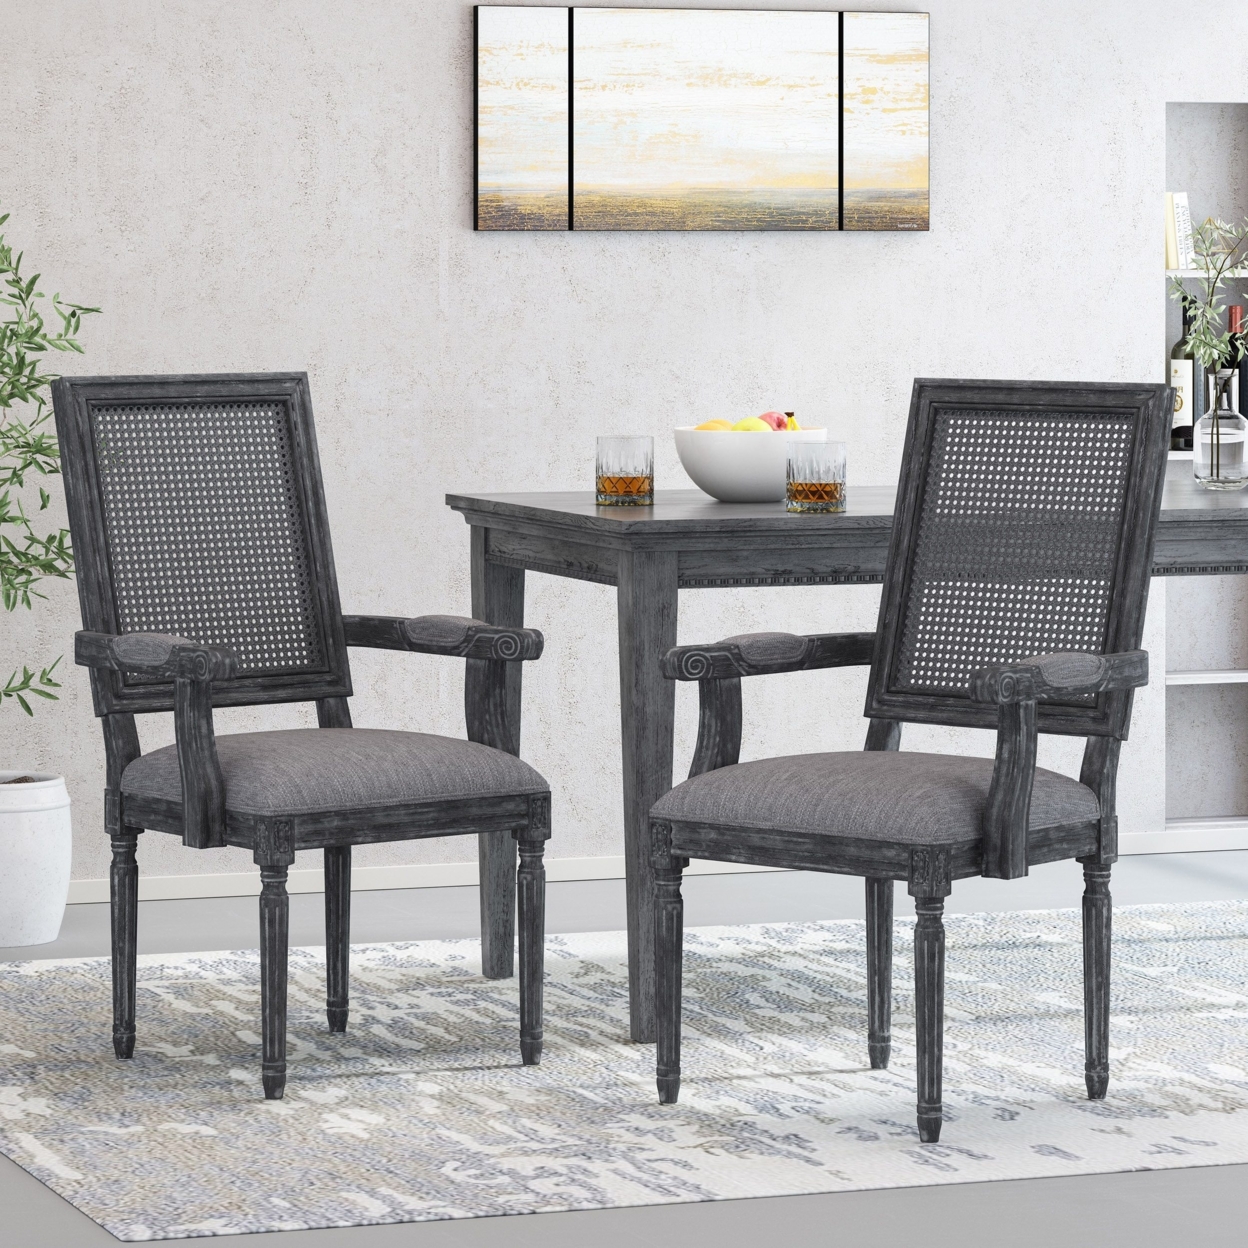 Zentner French Country Wood And Cane Upholstered Dining Chair - Gray/grey, Set Of 6